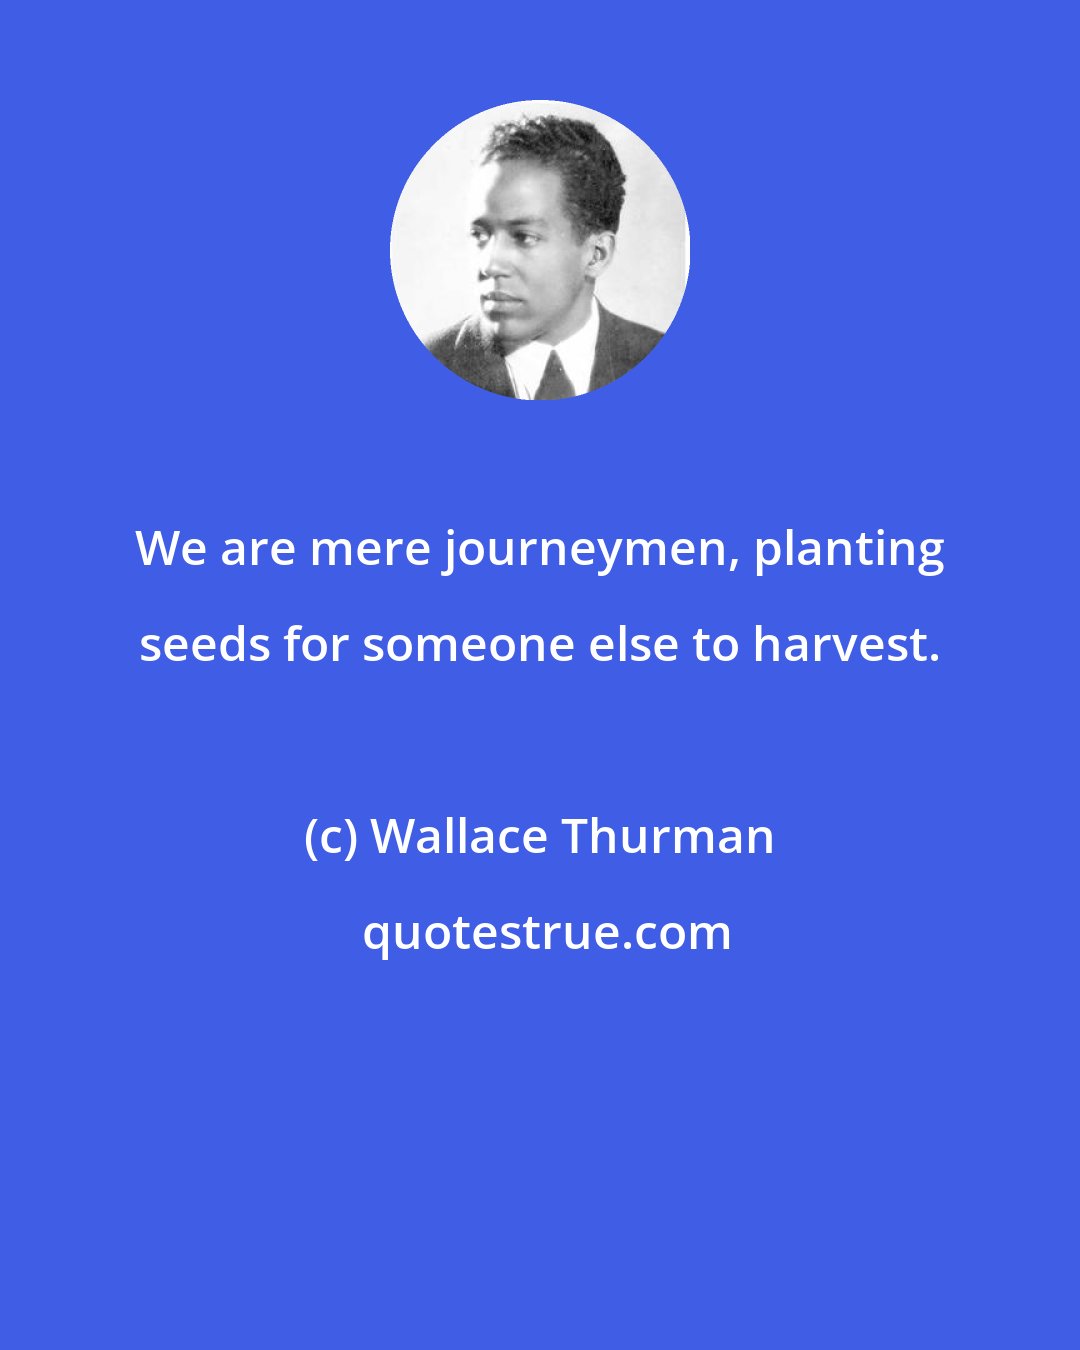 Wallace Thurman: We are mere journeymen, planting seeds for someone else to harvest.